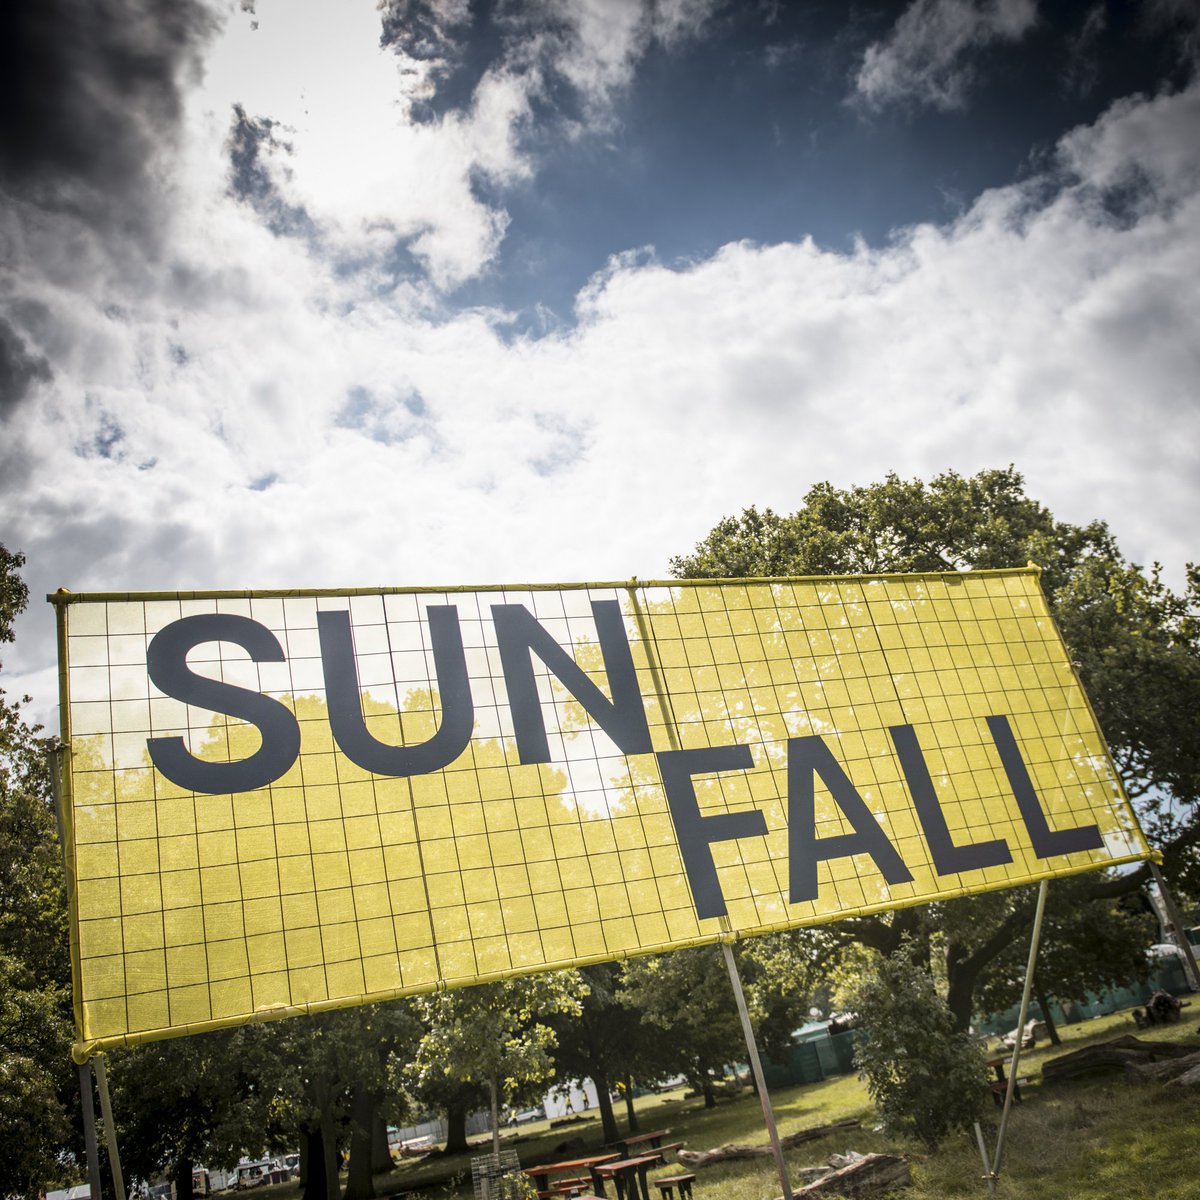 All set and ready to dance... See you in the park #Sunfall #SunfallLondon Photo courtesy of @isaac_buckton